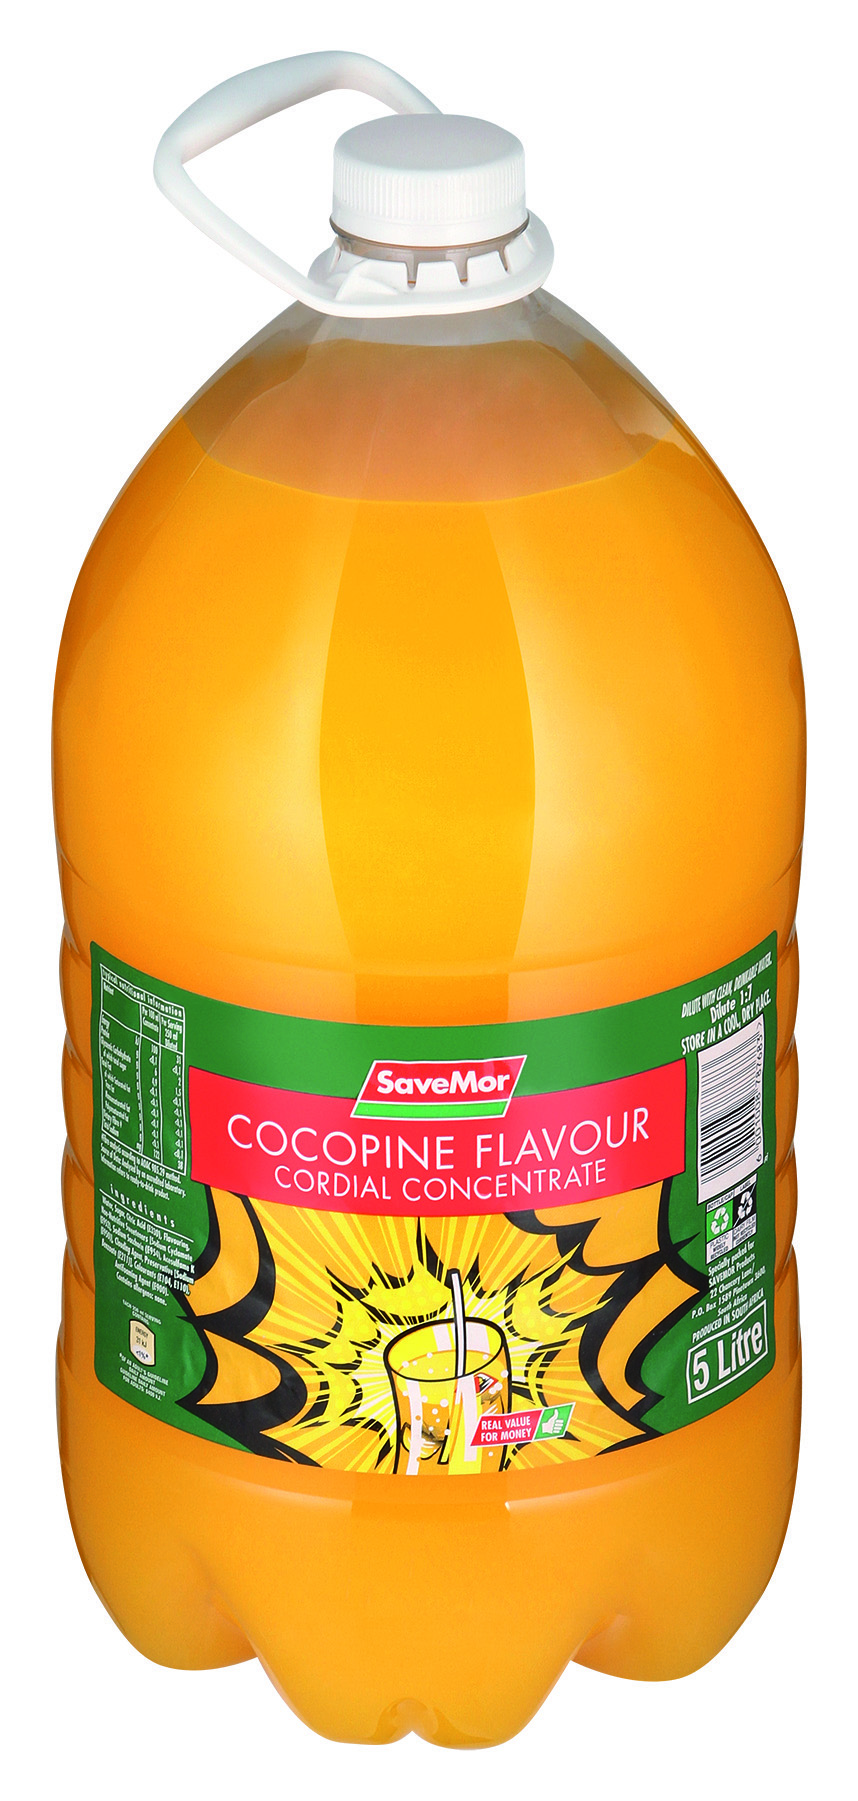 cordial concentrate cocopine flavour